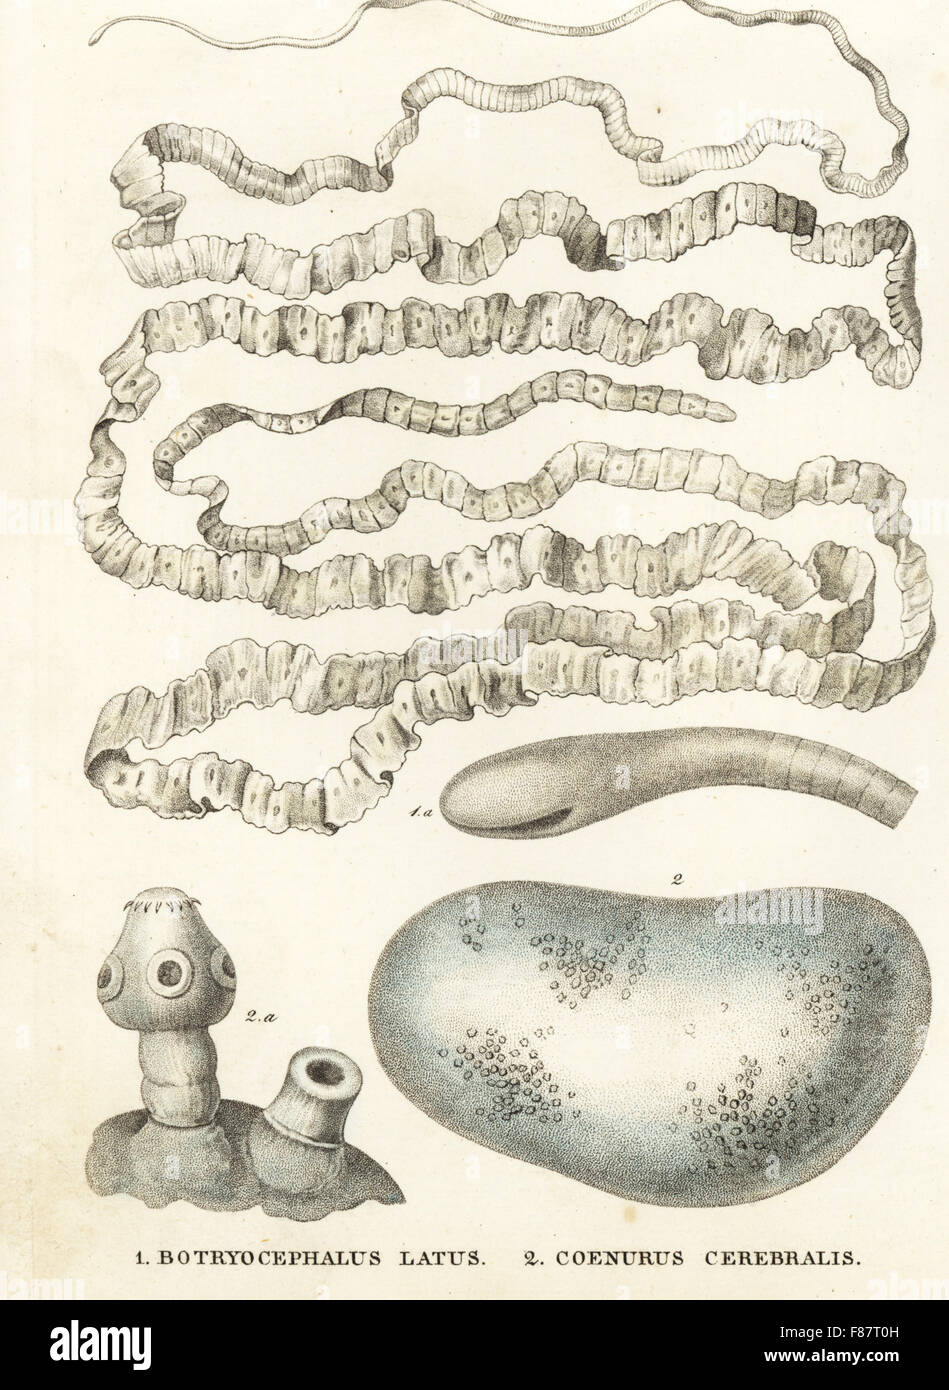 Asian tapeworm, Bothriocephalus acheilognathi (Botryocephalus latus), freshwater fish parasite, and Coenurus cerebralis, larva of the tapeworm Multiceps multiceps, found in sheep's brains. Handcoloured lithograph from Georg Friedrich Treitschke's Gallery of Natural History, Naturhistorischer Bildersaal des Thierreiches, Liepzig, 1842. Stock Photo